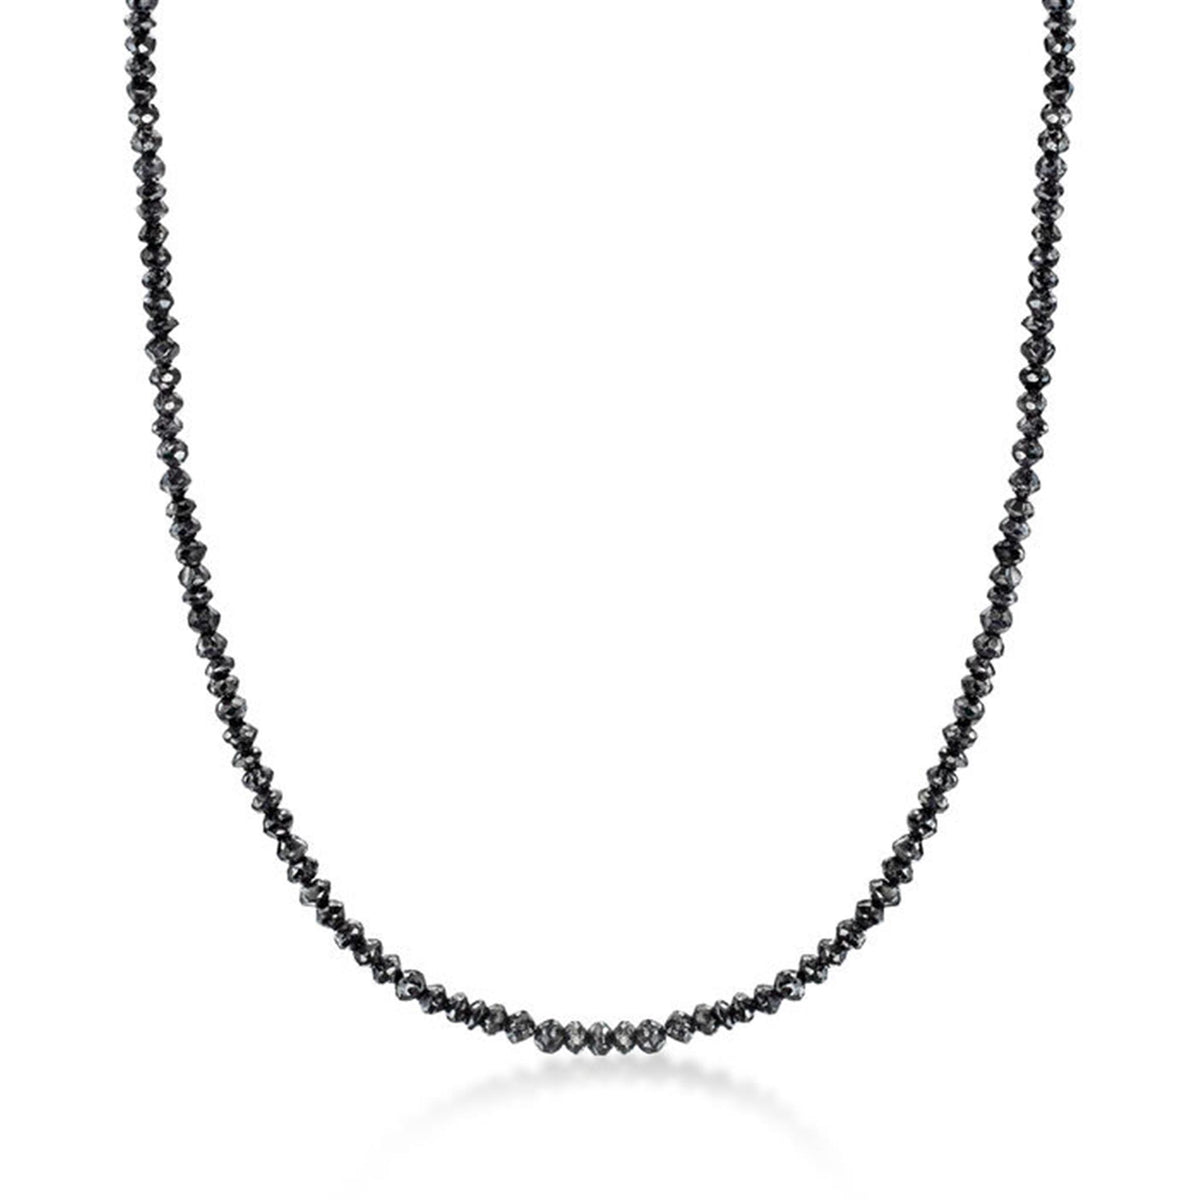 18" Faceted 2mm Black Diamond Bead Necklace - 18.52cttw